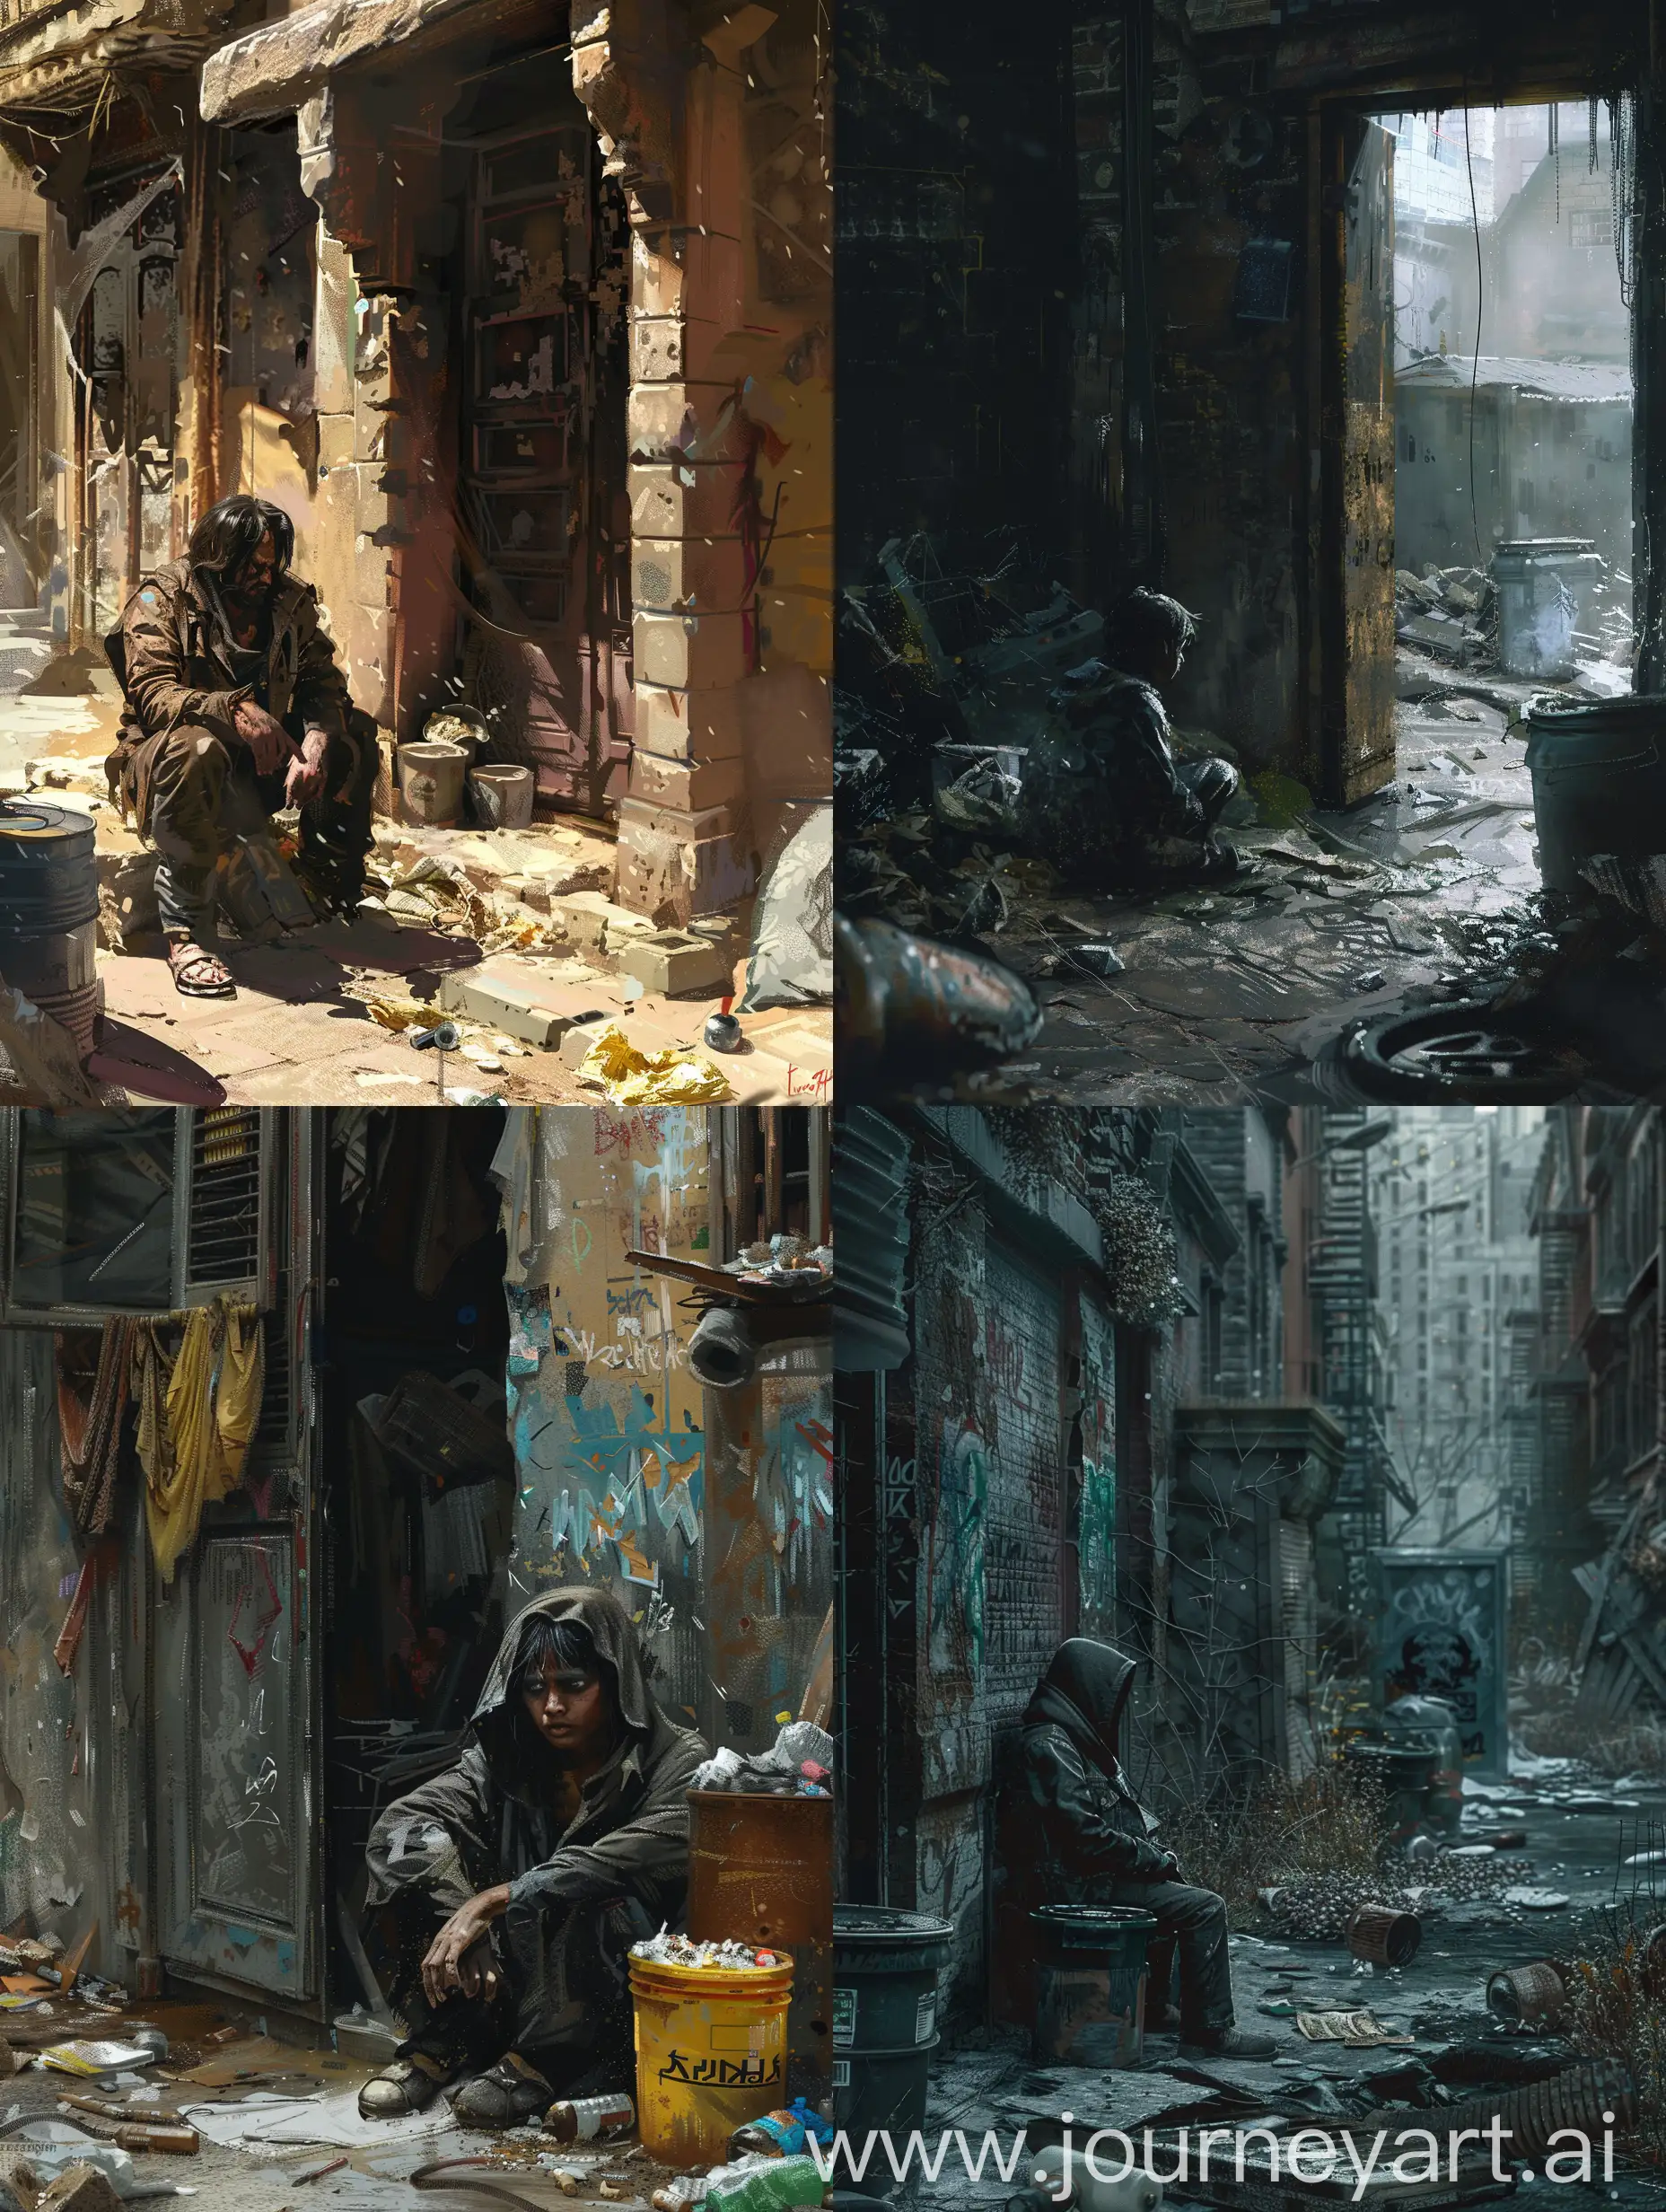 A dark-skinned kid, homeless, uncouth and long hair, dirty and beaten, a desperate expression on his face :: A doorway, garbage cans and a lot of garbage, everything is in ruins, a poor area